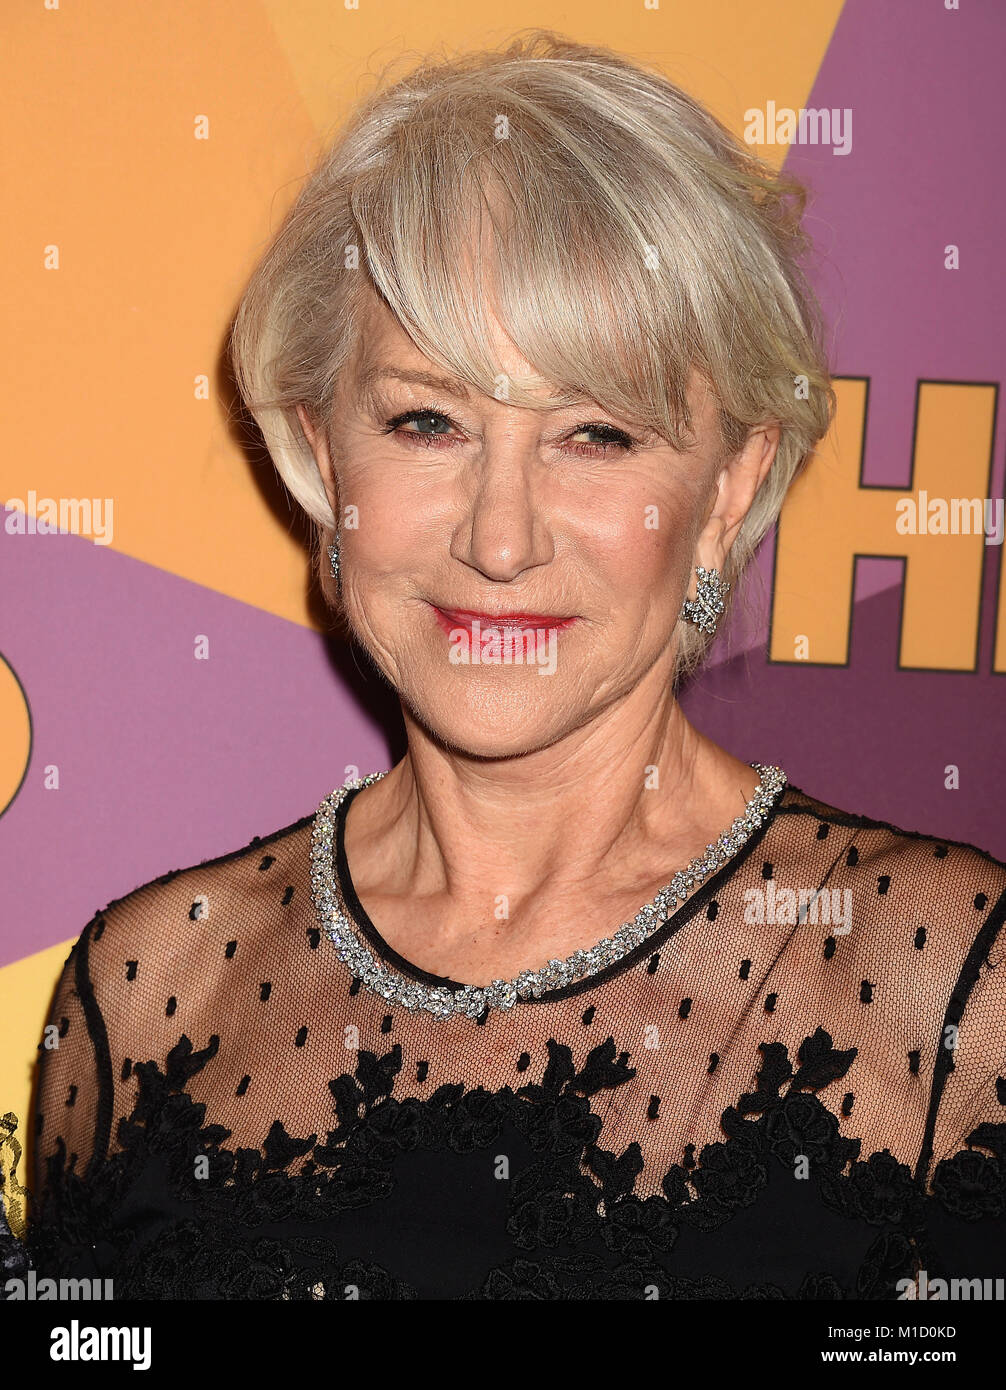 HELEN MIRREN UK film actress  arrives at HBO's Official Golden Globe Awards After Party at Circa 55 Restaurant in the Beverly Hilton Hotel on January 7, 2018 in Los Angeles, California. Photo: Jeffrey Mayer Stock Photo